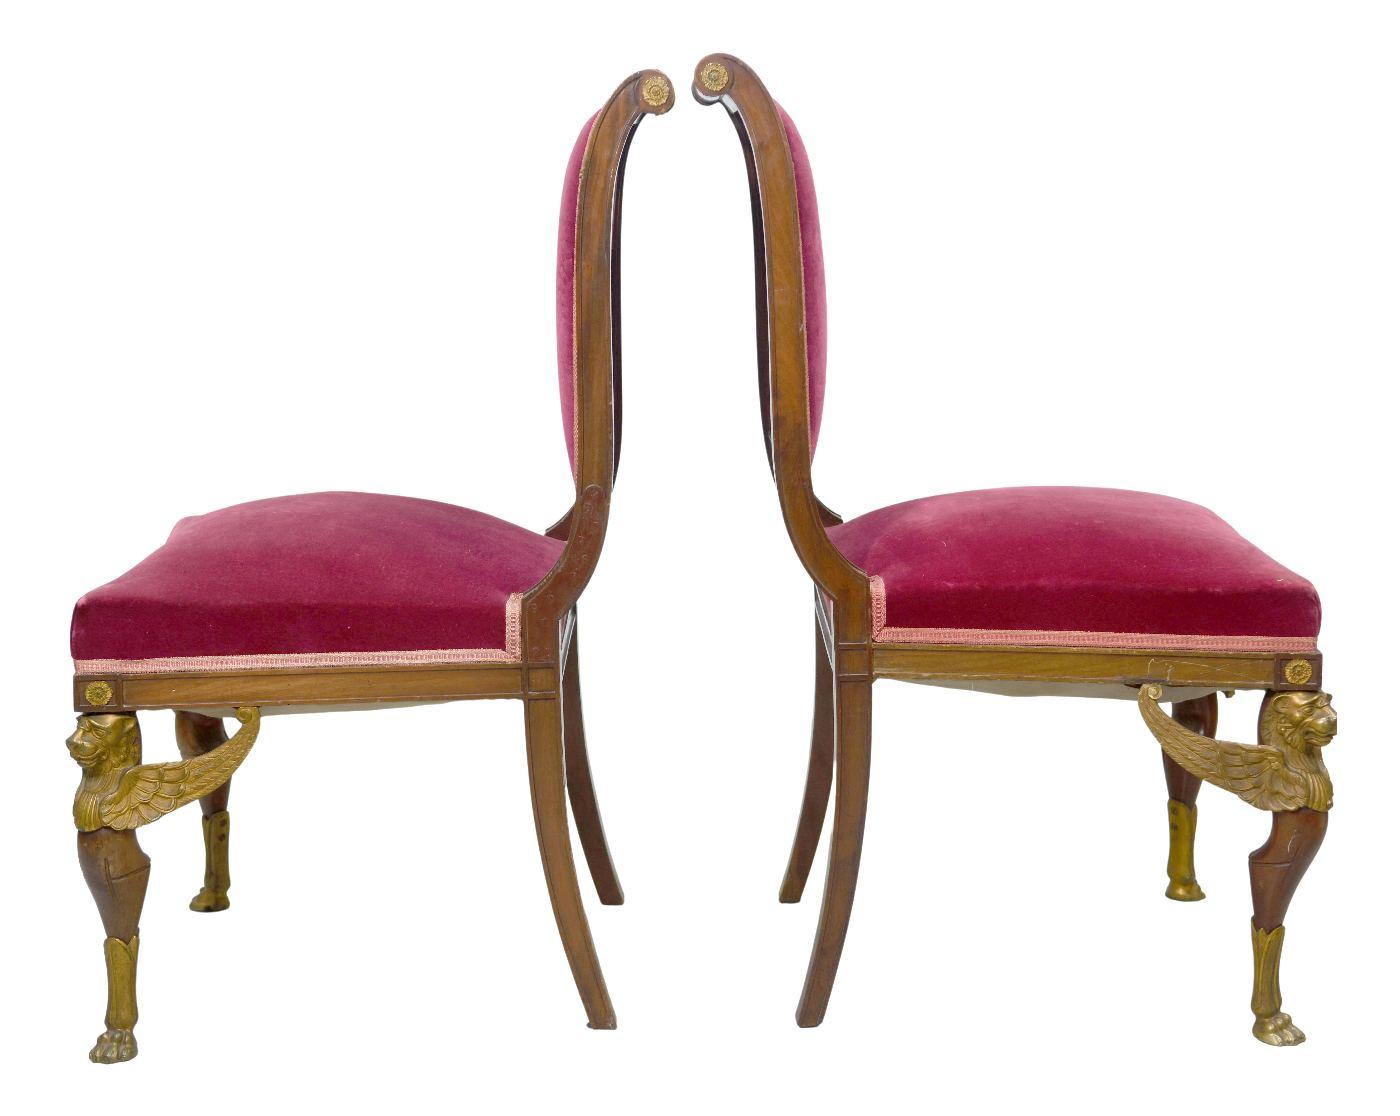 Pair of empire style mahogany and gilt bronze visitor chairs decorated with griffins upholstered in rich raspberry velvet gilt bronze register dimension height 96 cm for a width and a depth of 56 cm.